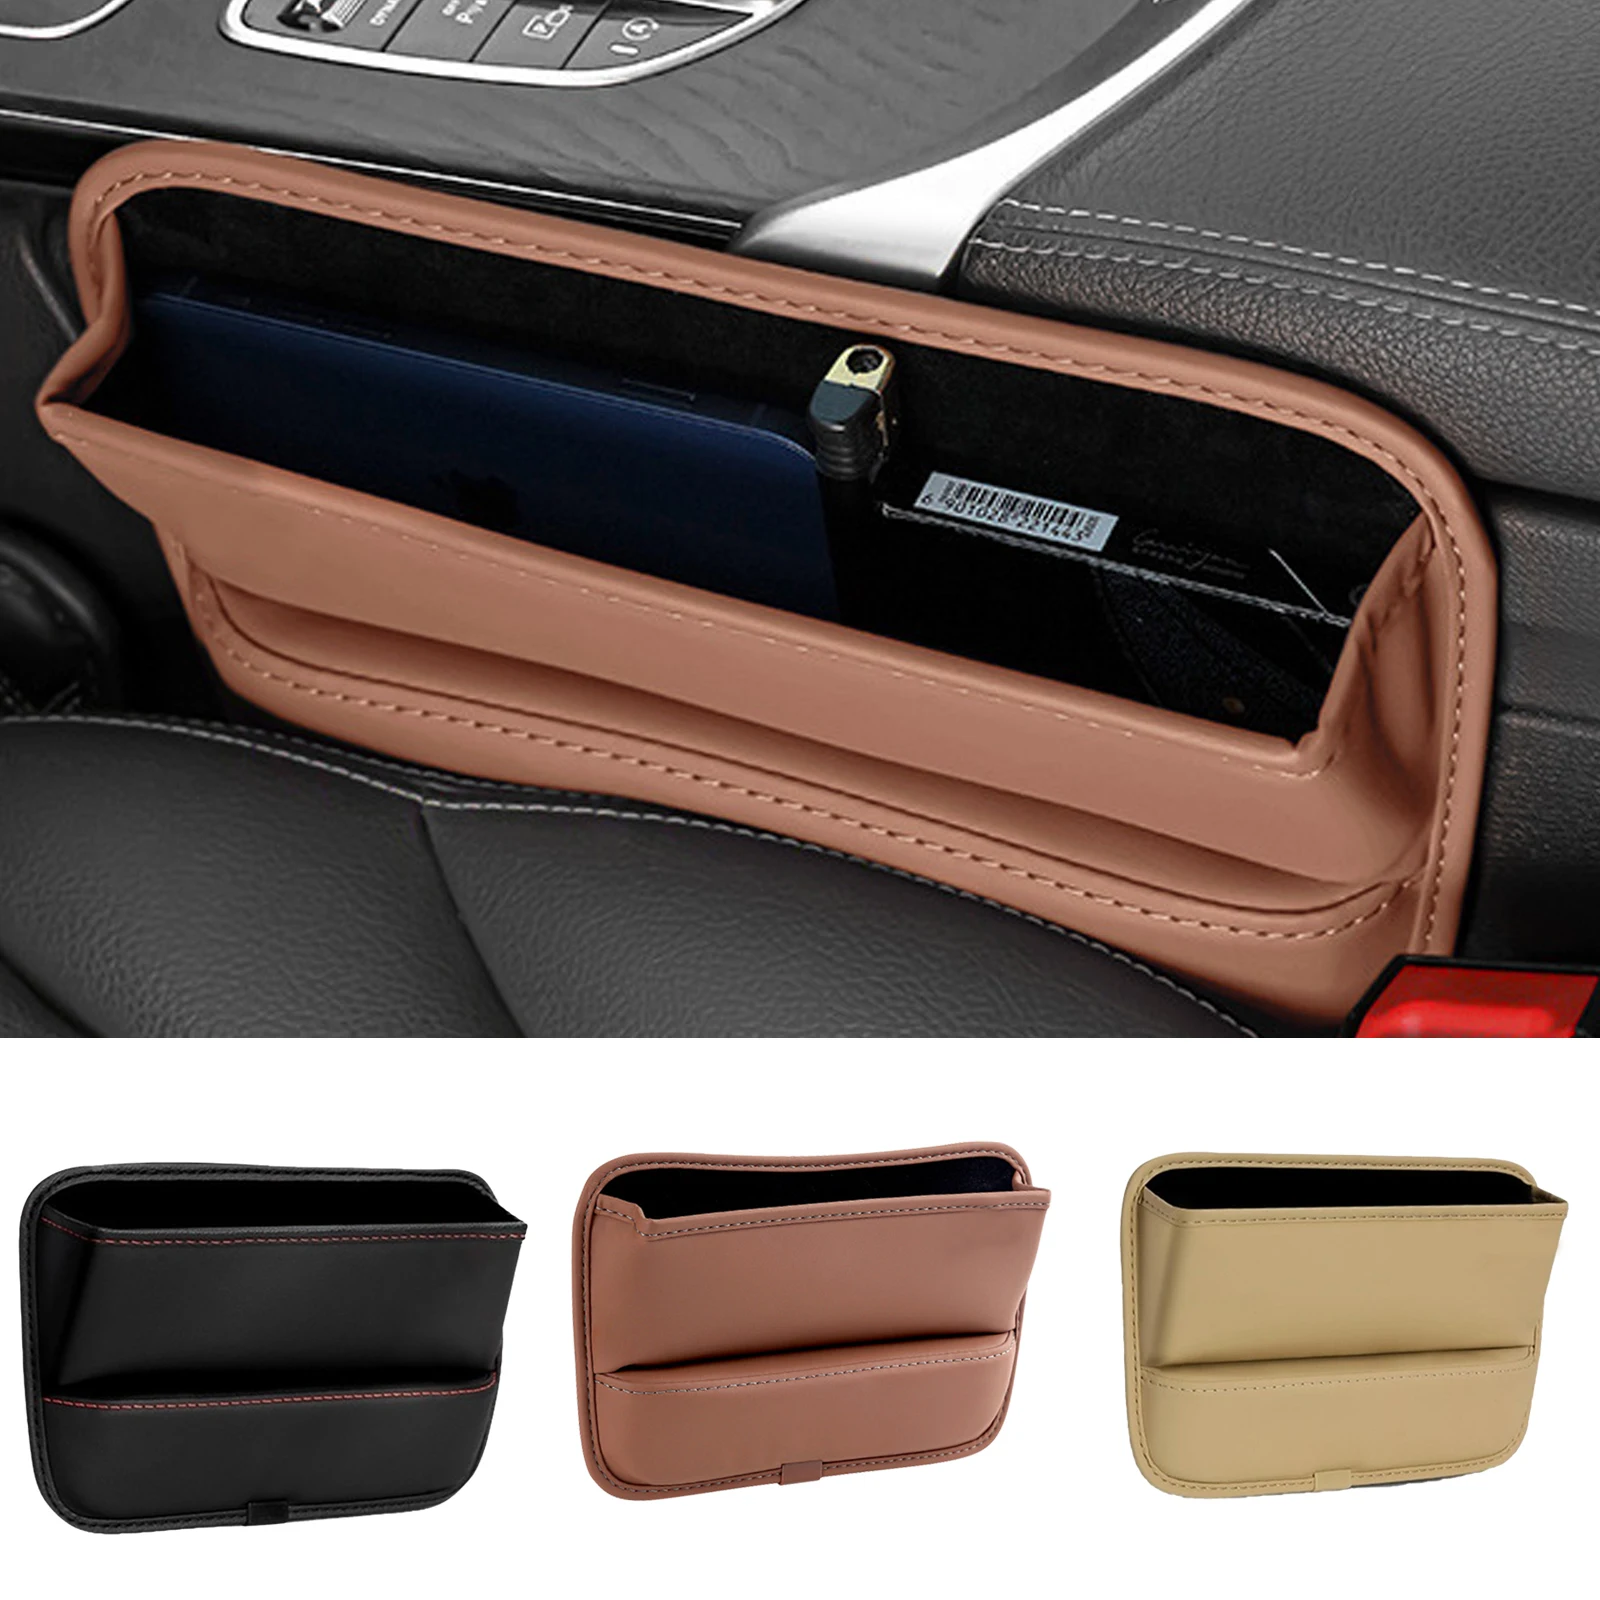 

PU Leather Car Console Side Seat Gap Filler Front Seat Organizer for Cellphone Keys Small Items Automotive Interior Car Gadget